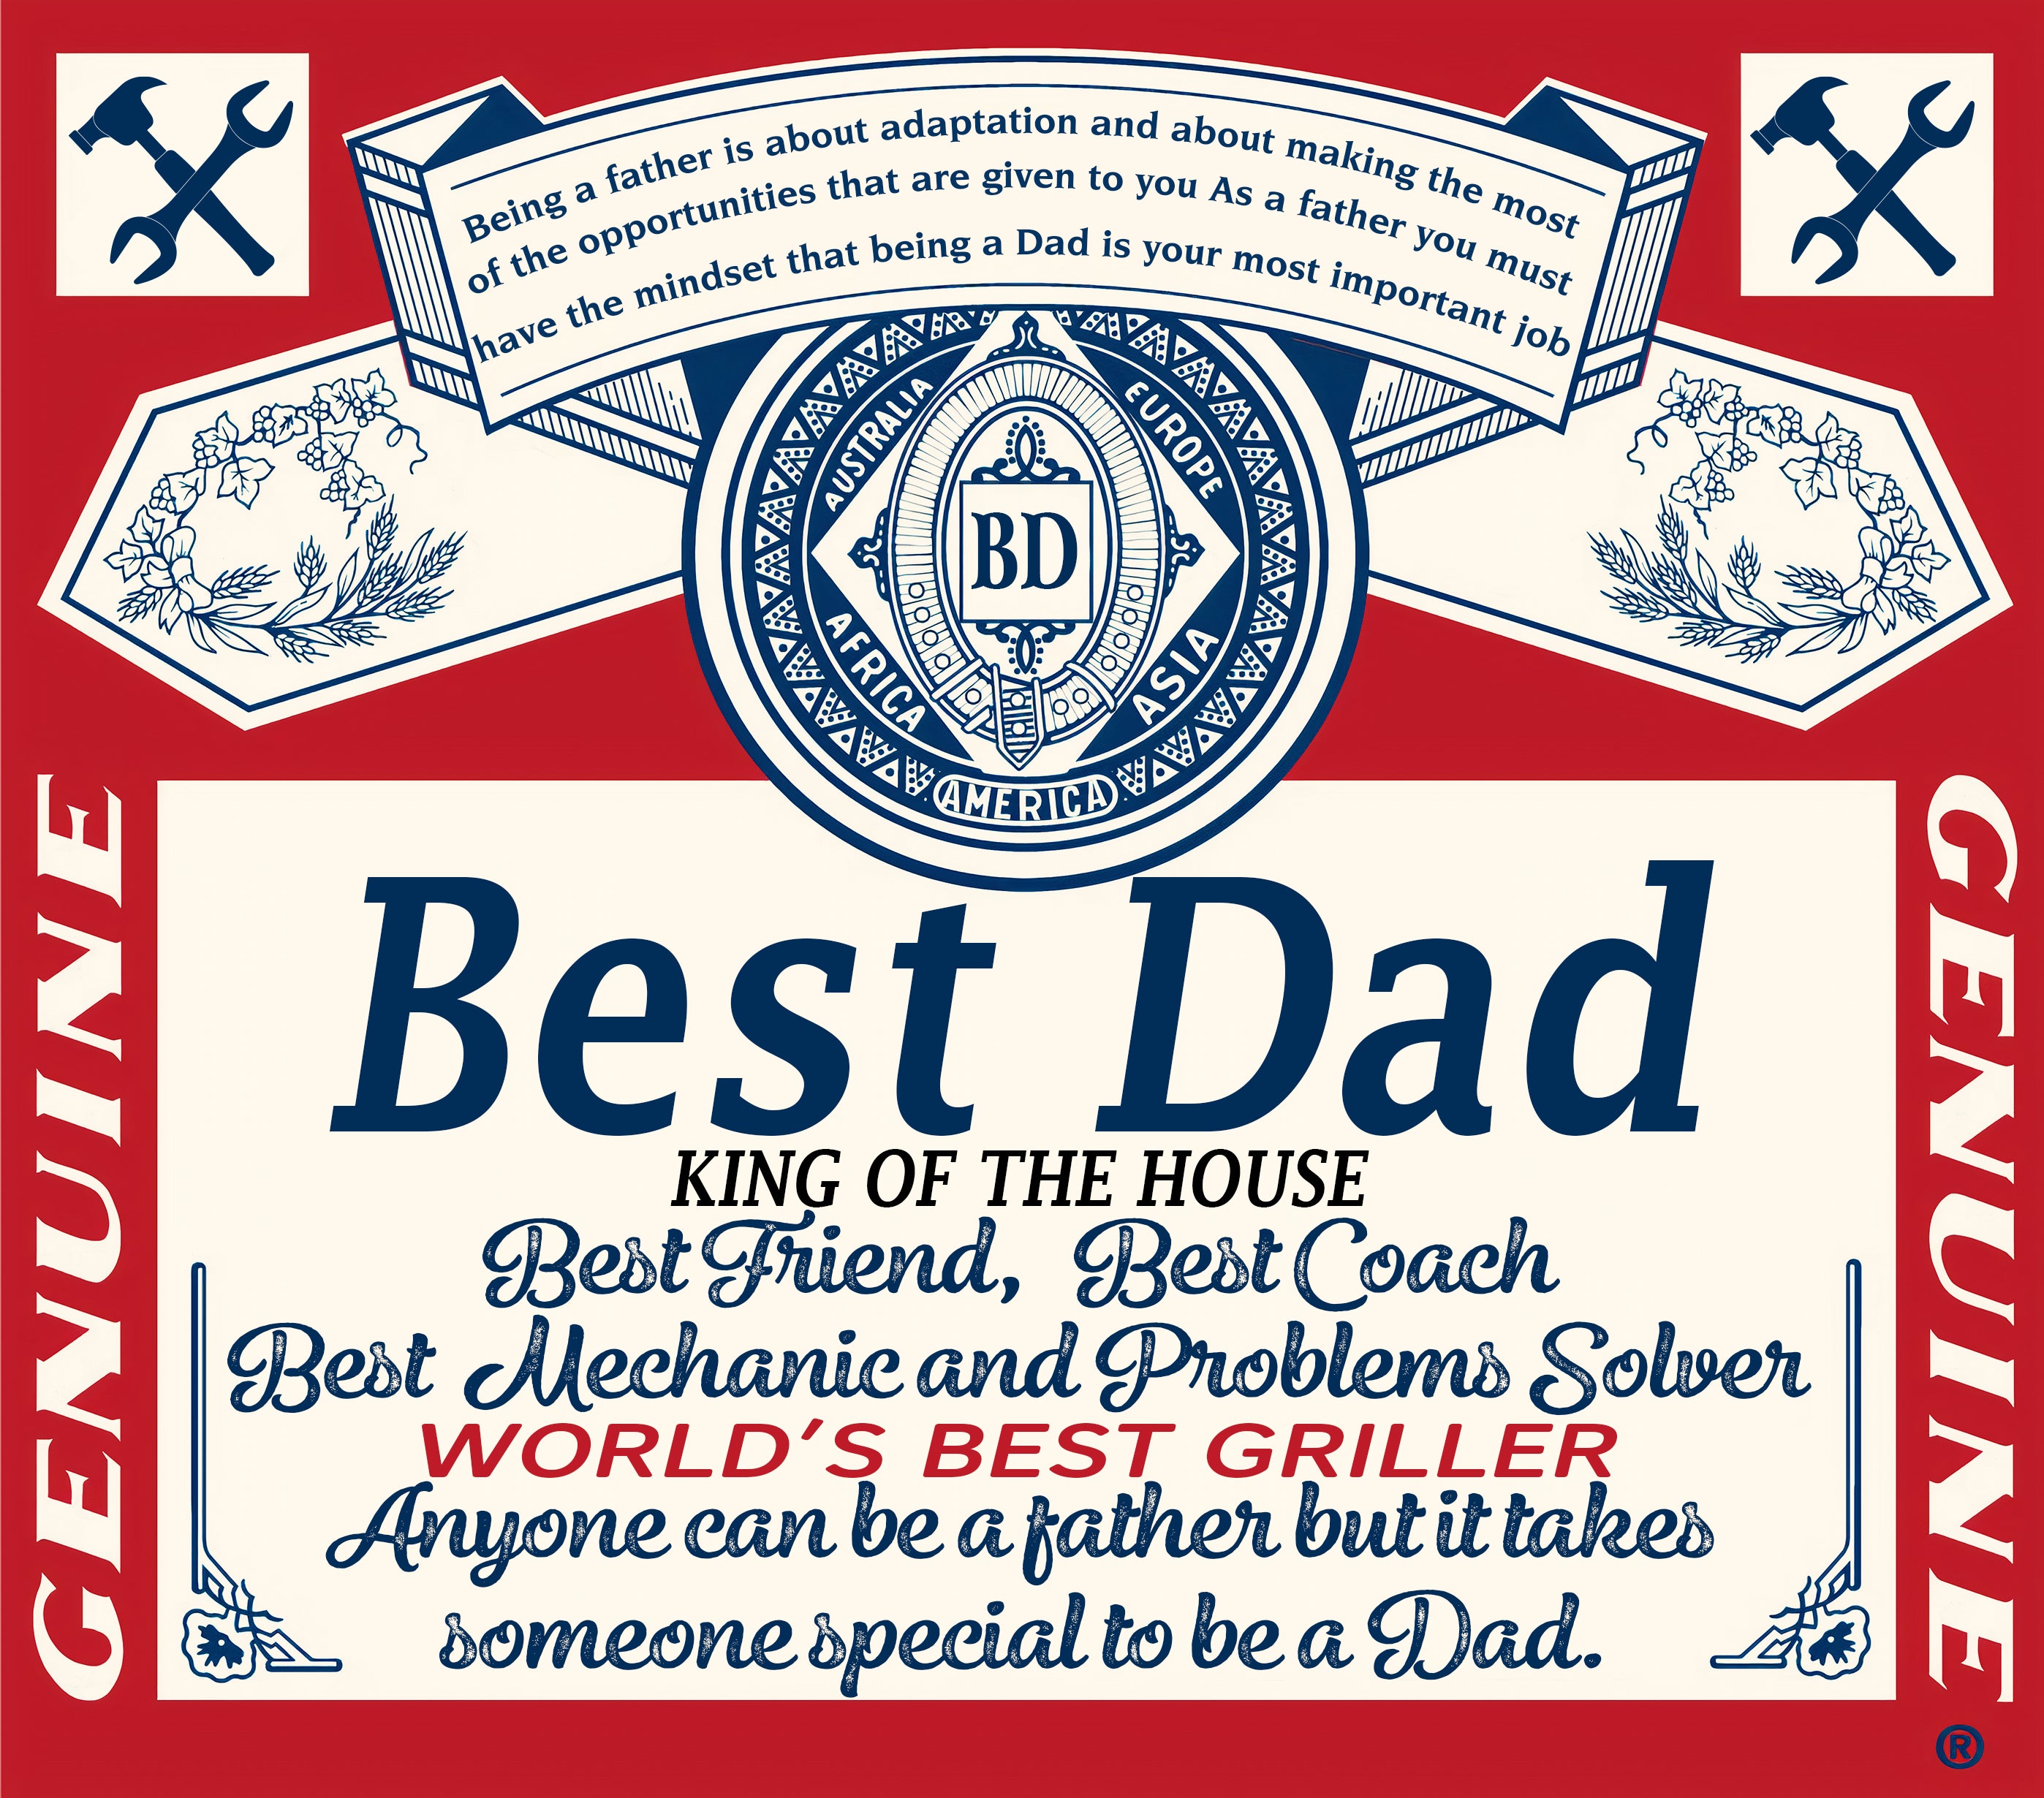 Sublimation Prints - Best Dad King of the House - The Vinyl Haus